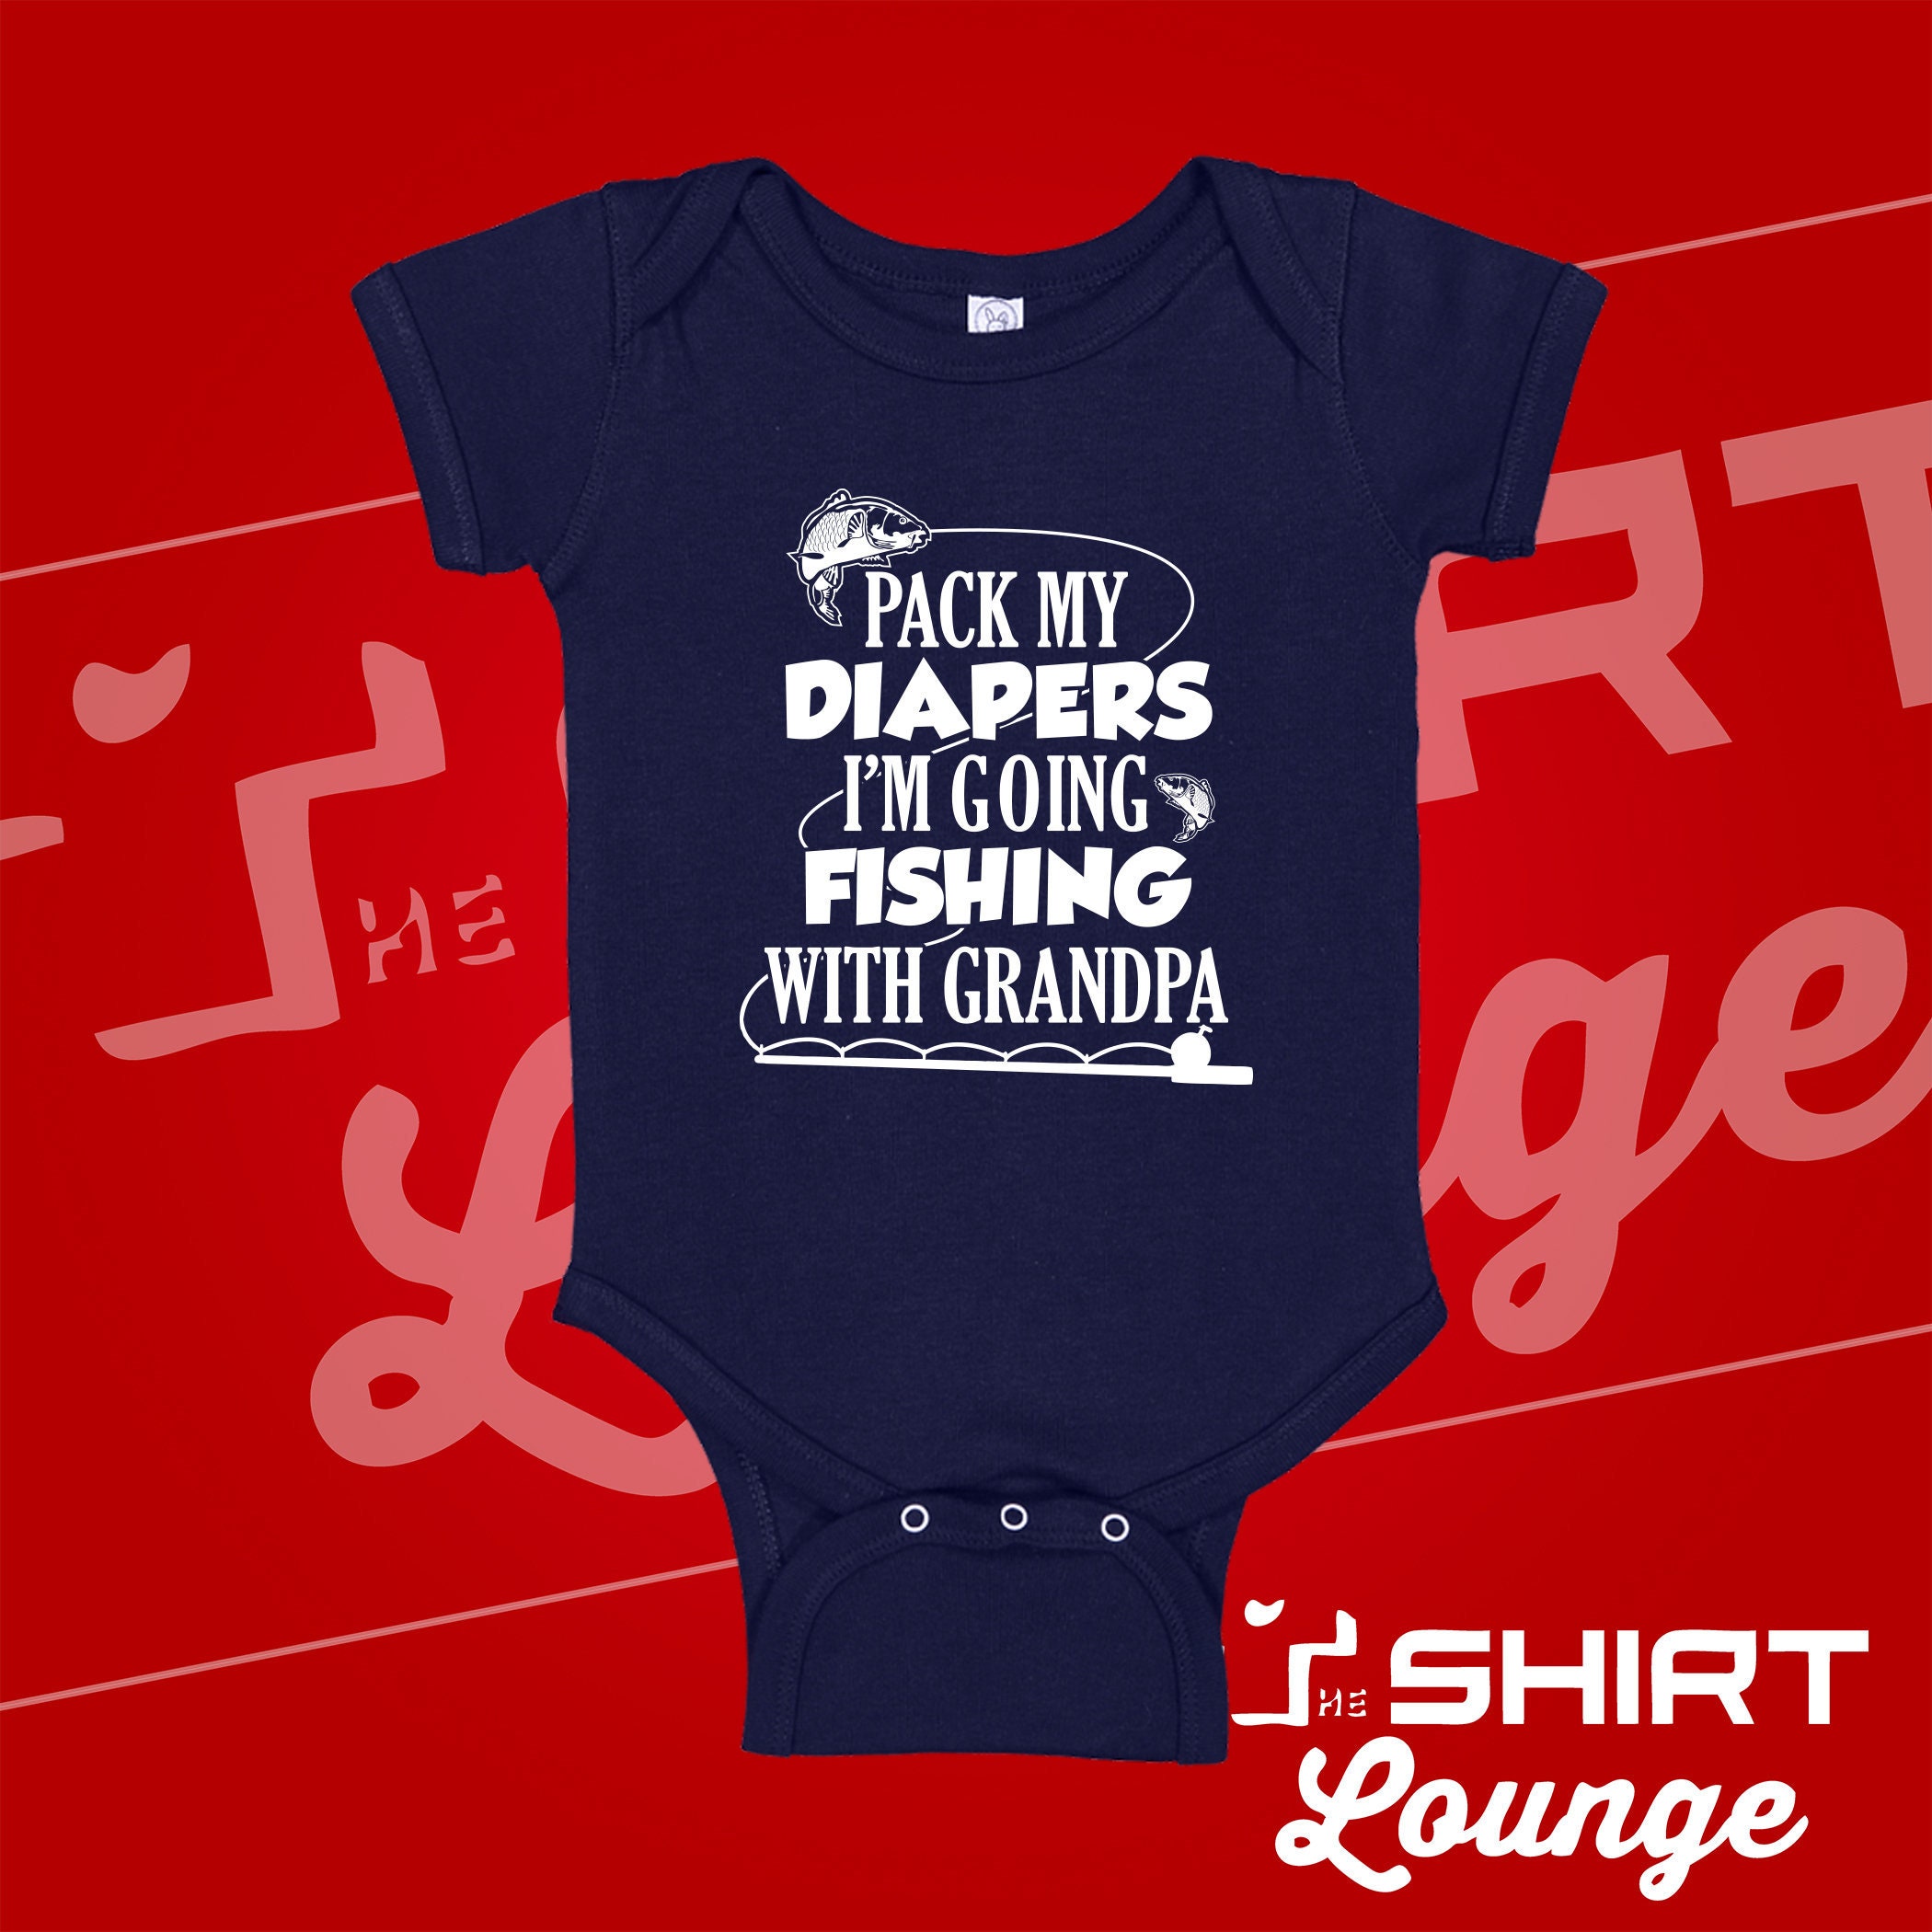 I'm Going Fishing With My Grandpa Baby Bodysuit One Piece Toddler